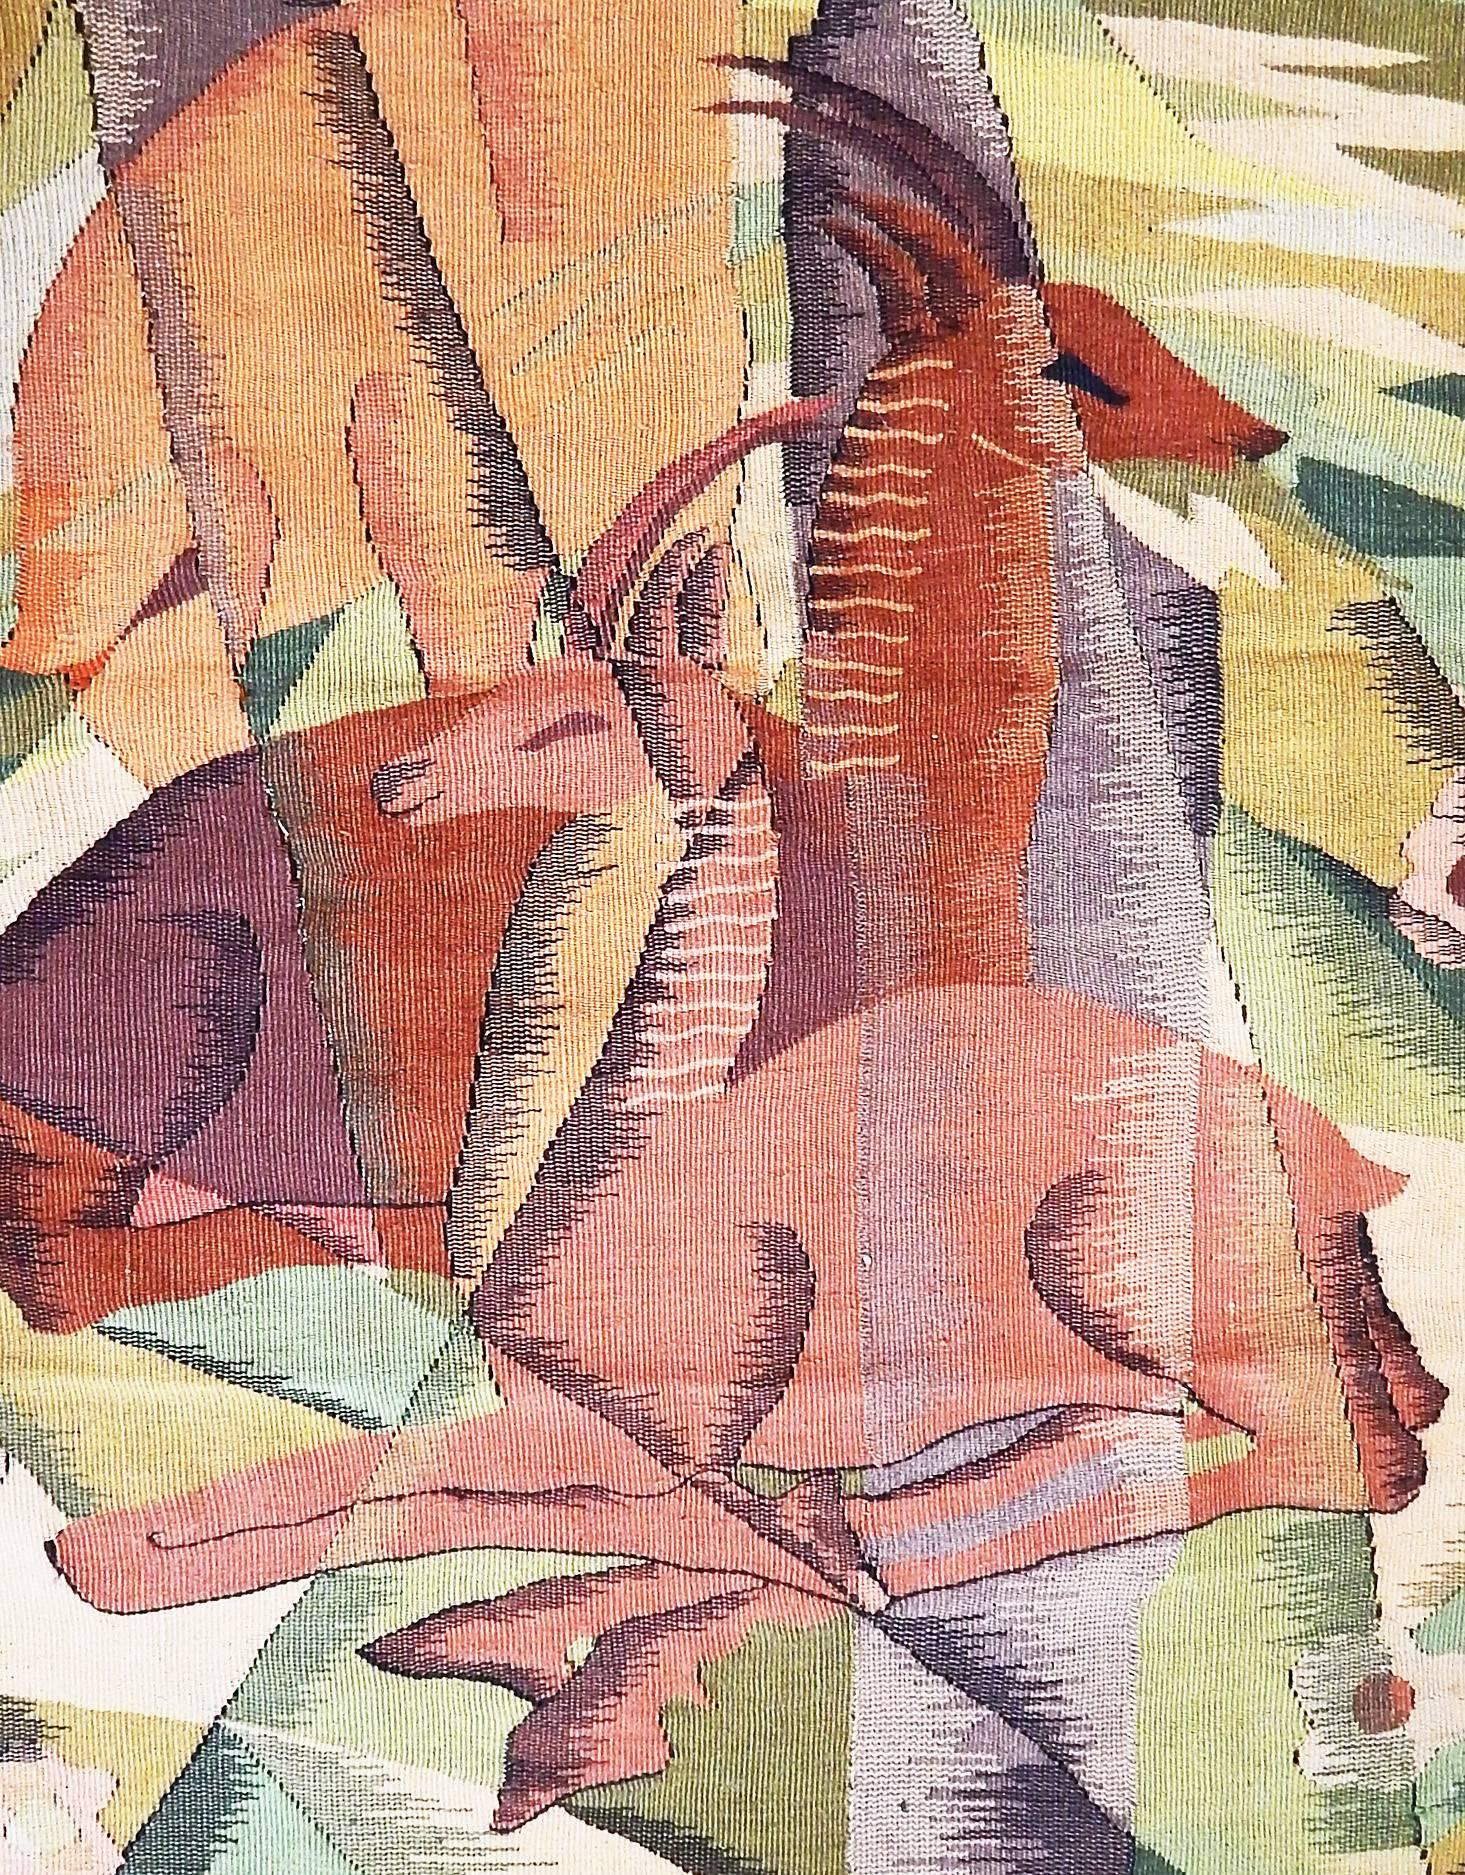 Brilliantly occupying the fabled place where Art Deco stylization and Cubist fragmentation meet, this tapestry brilliantly captures a trio of mountain goats -- in gorgeous shades of camel, burnt sienna and dusty marble -- in a fractured, mountainous